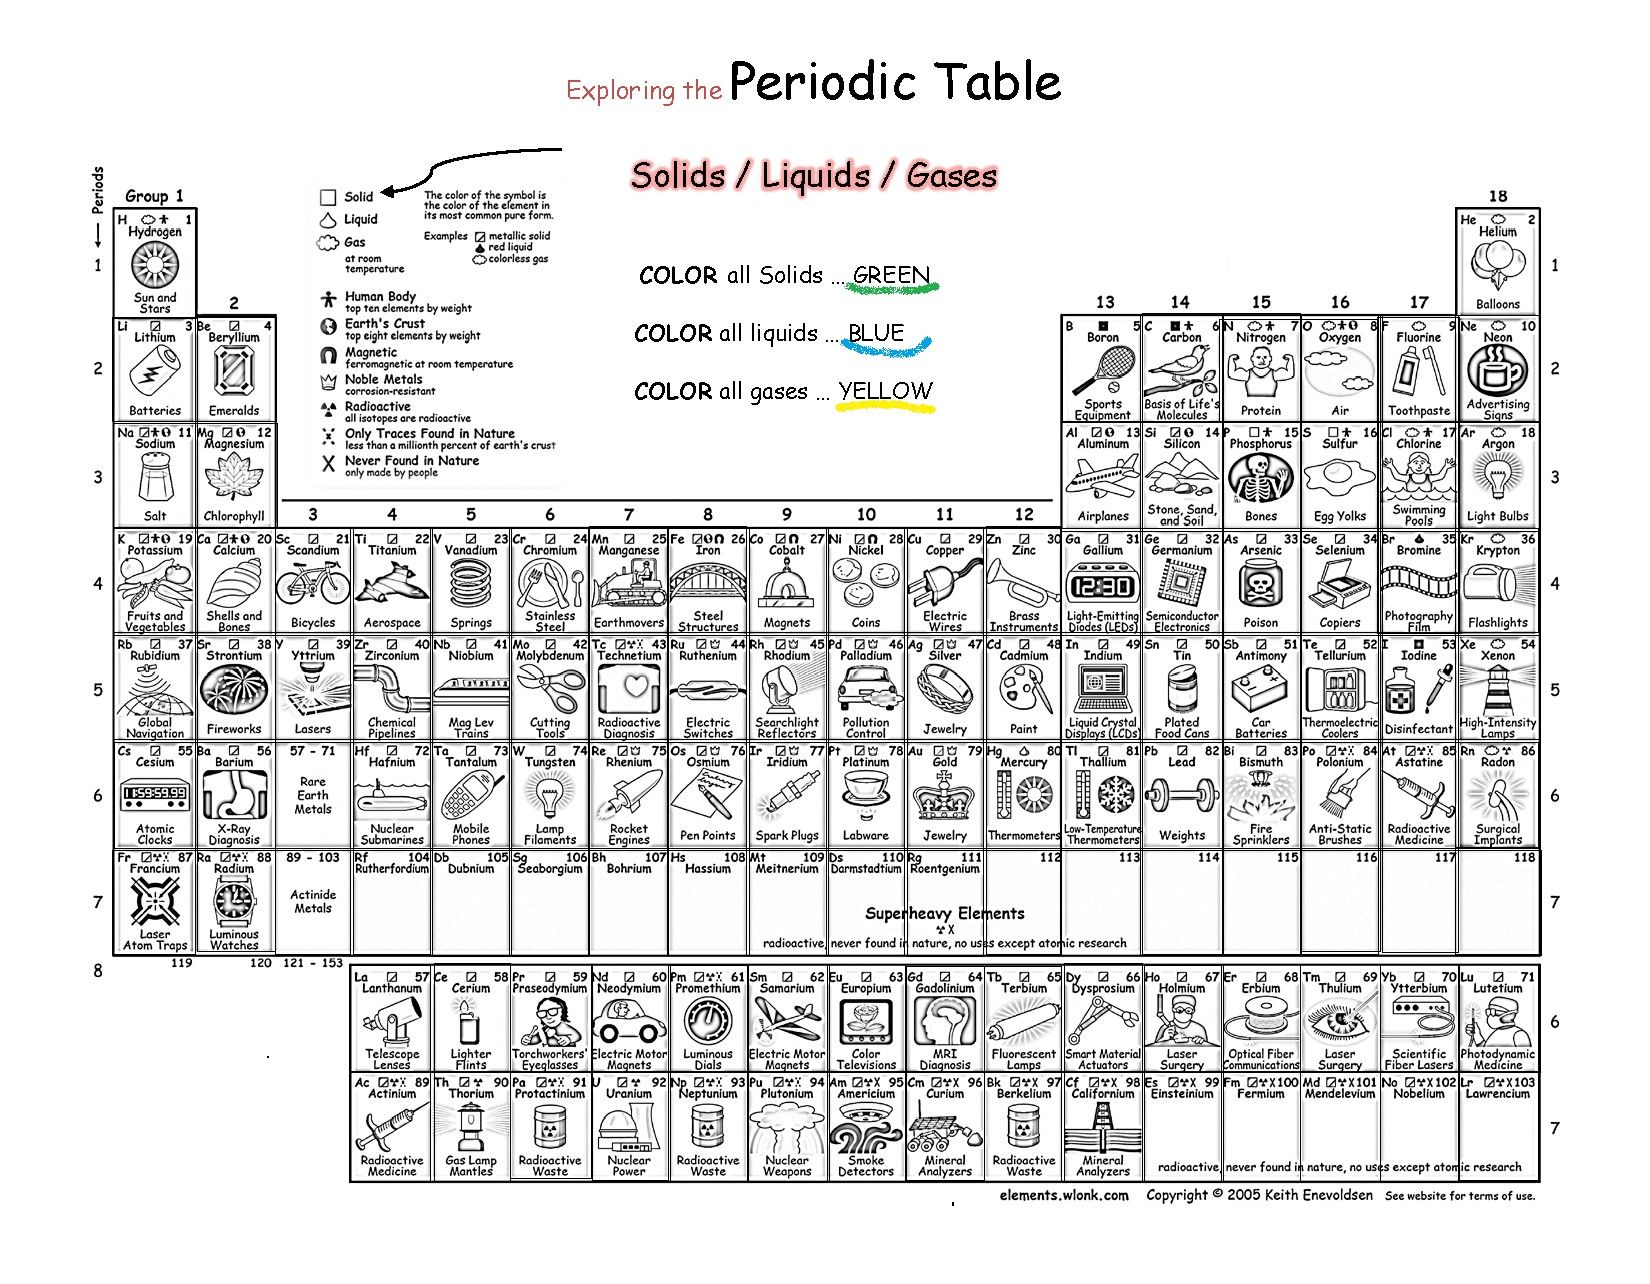 Periodic table coloring sheet pdf copy periodic table elements coloring sheet image collections refrence â color activities geometry worksheets color worksheets